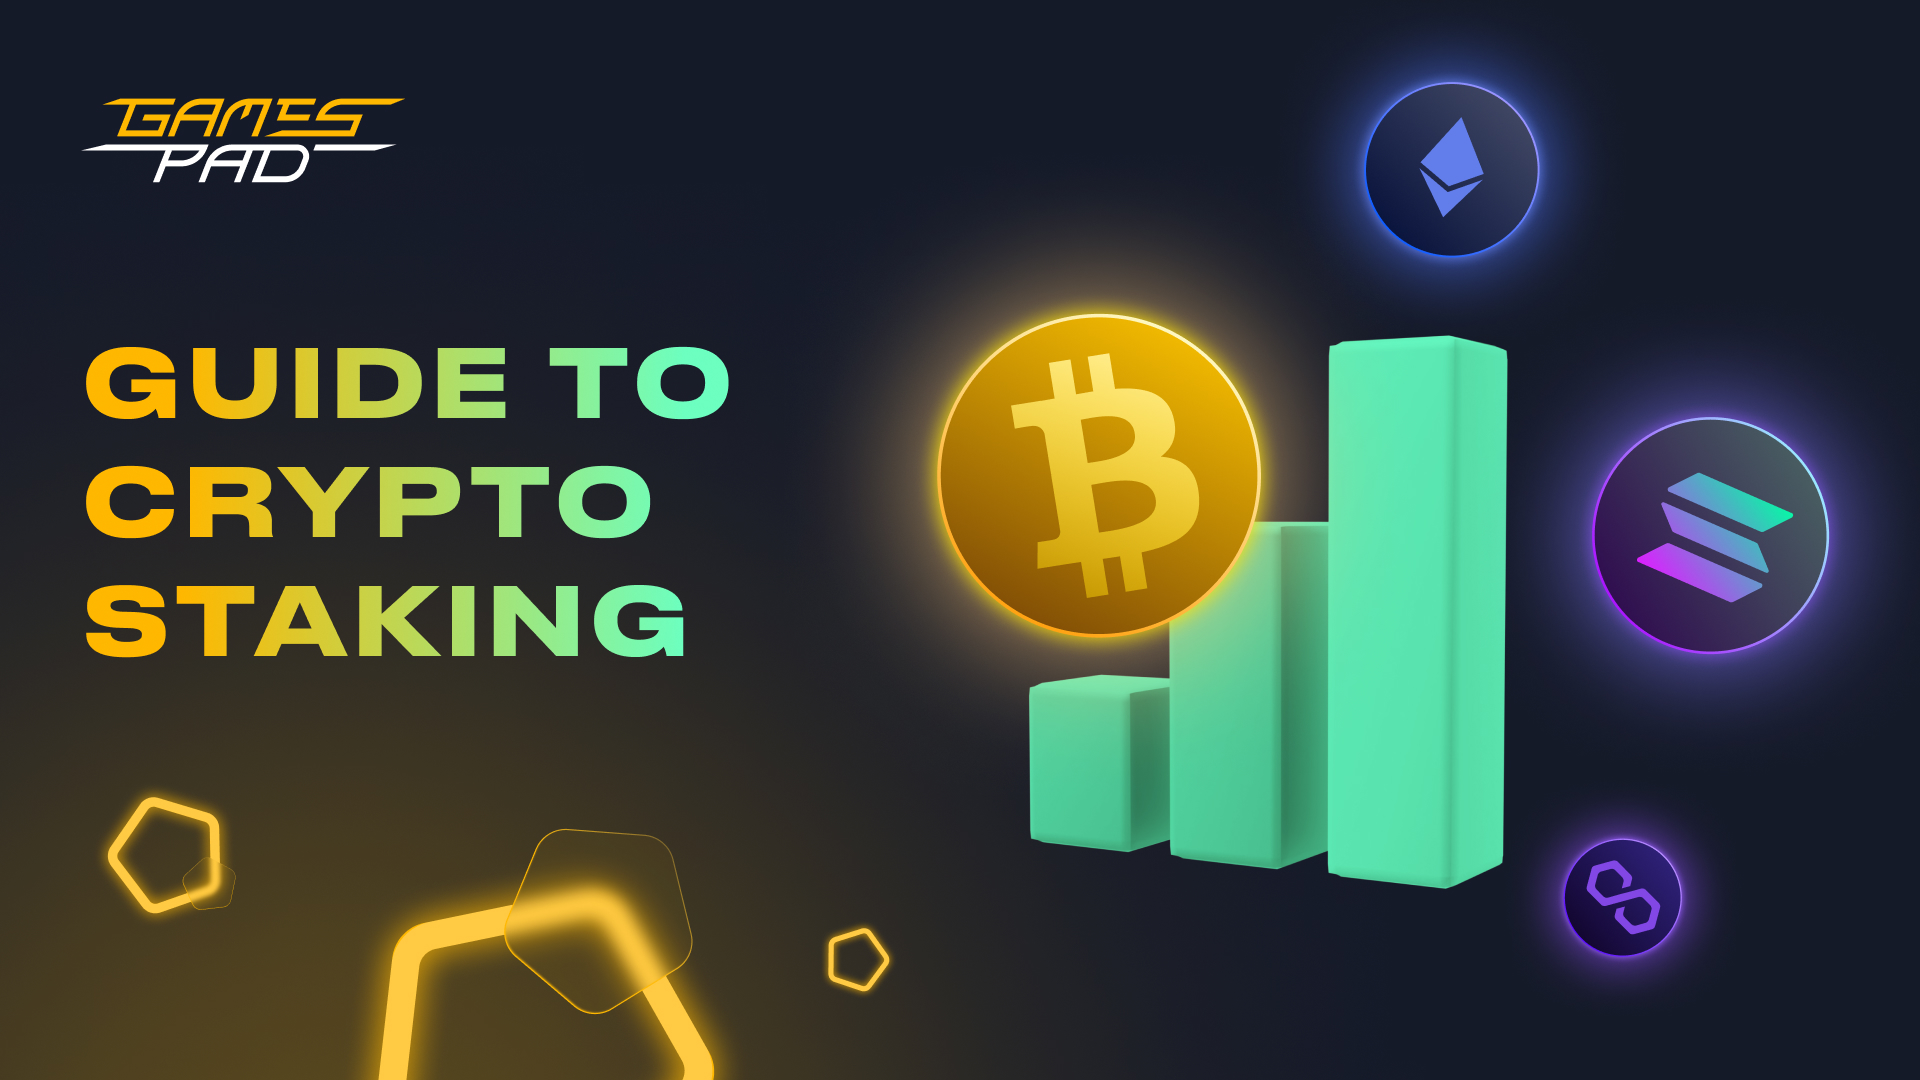 Guide to Crypto Staking